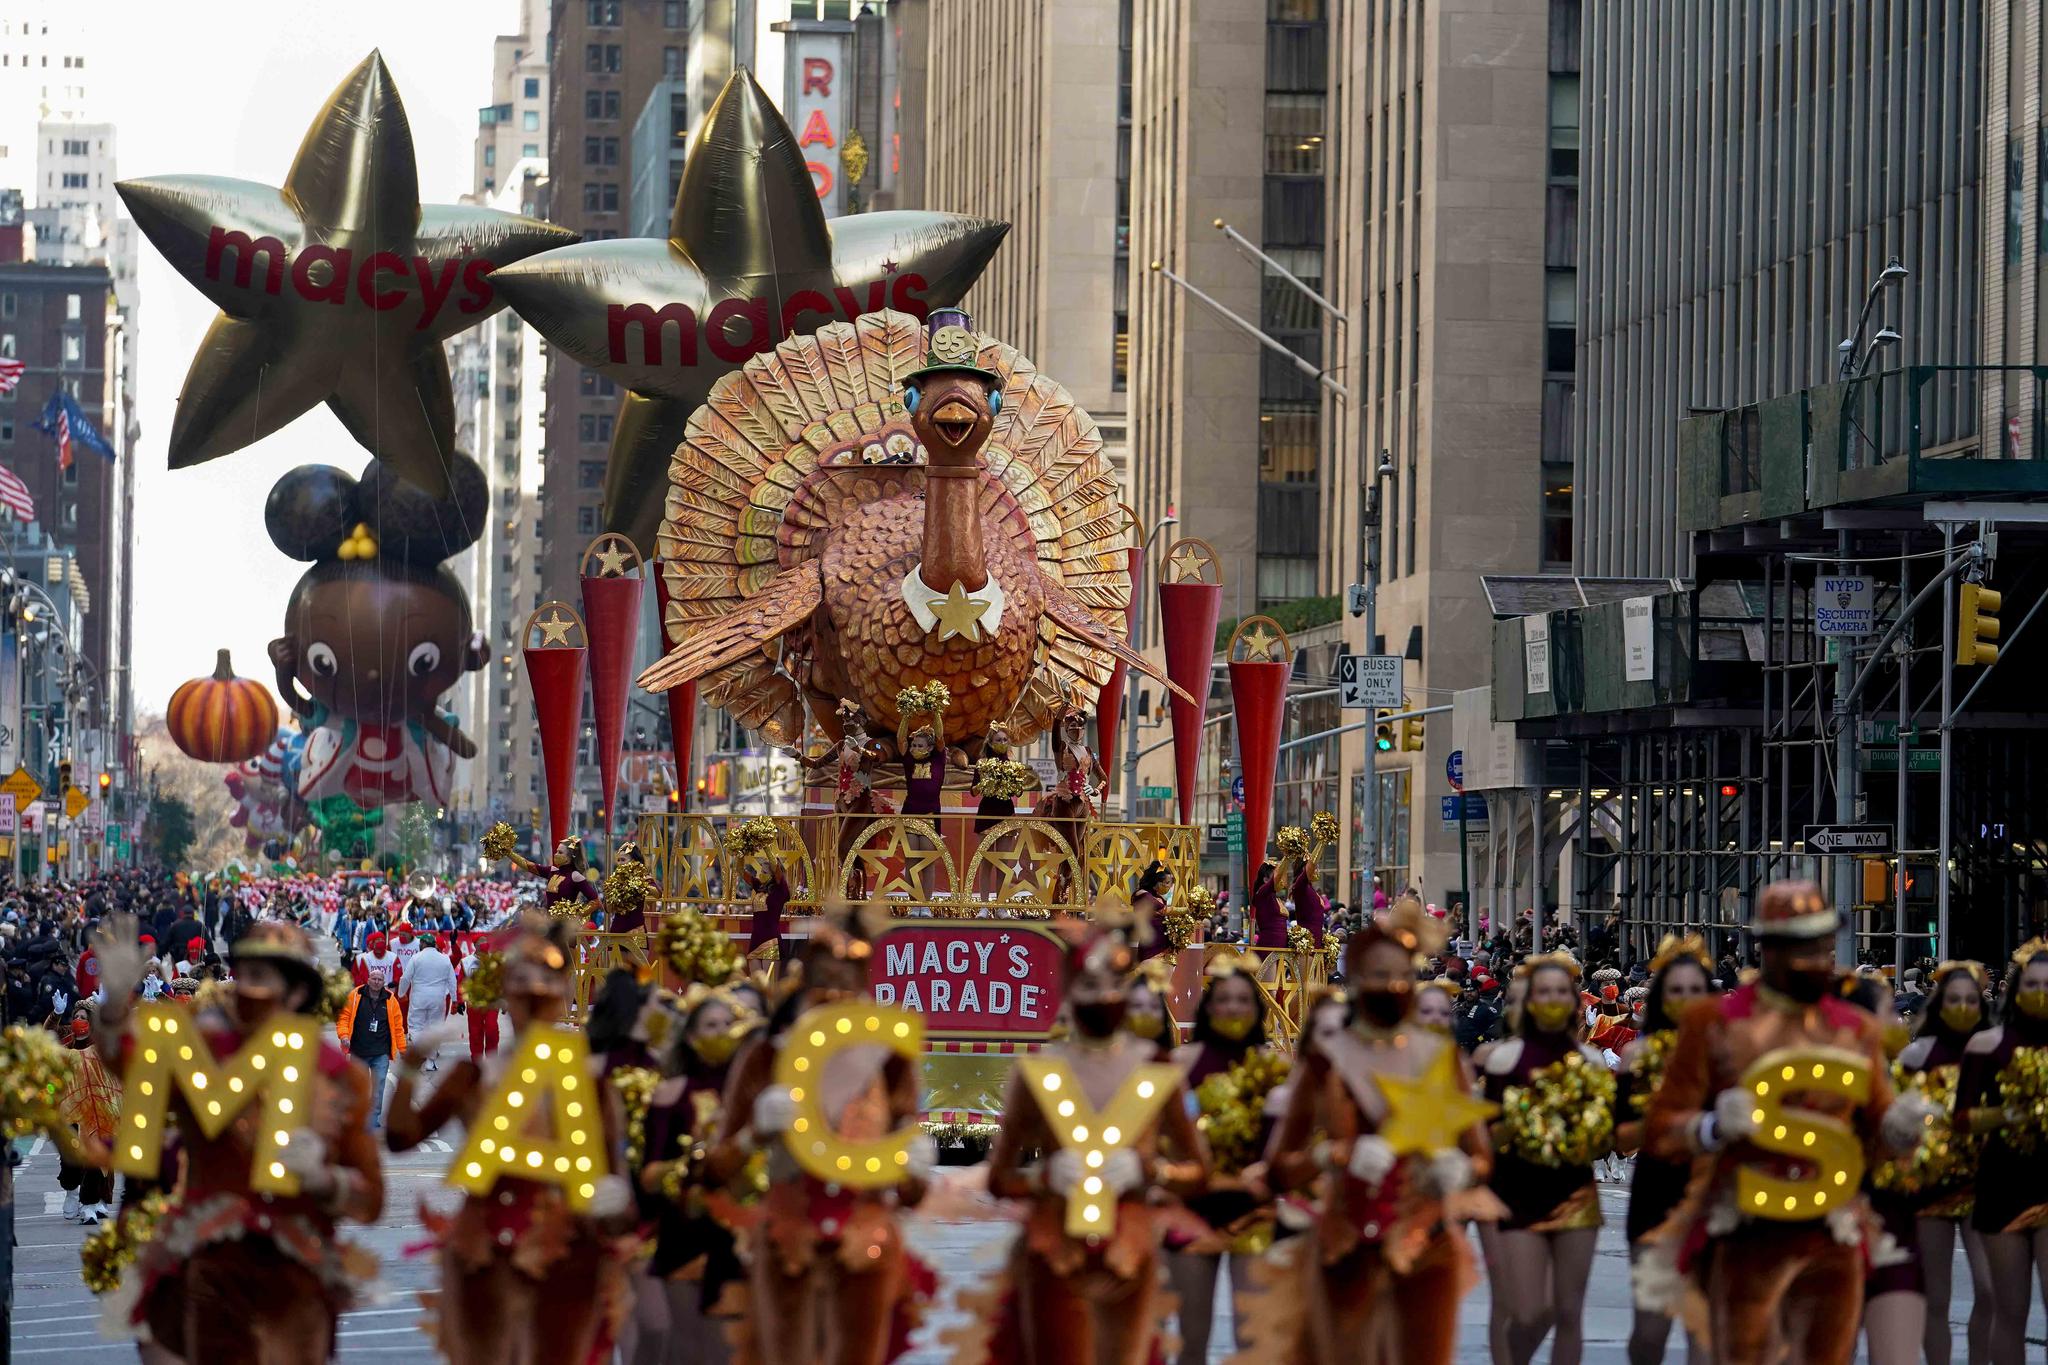 The Tom Turkey float moves down Sixth Avenue during the Macy's Thanksgiving Day Parade in New York, Thursday, Nov. 25, 2021.